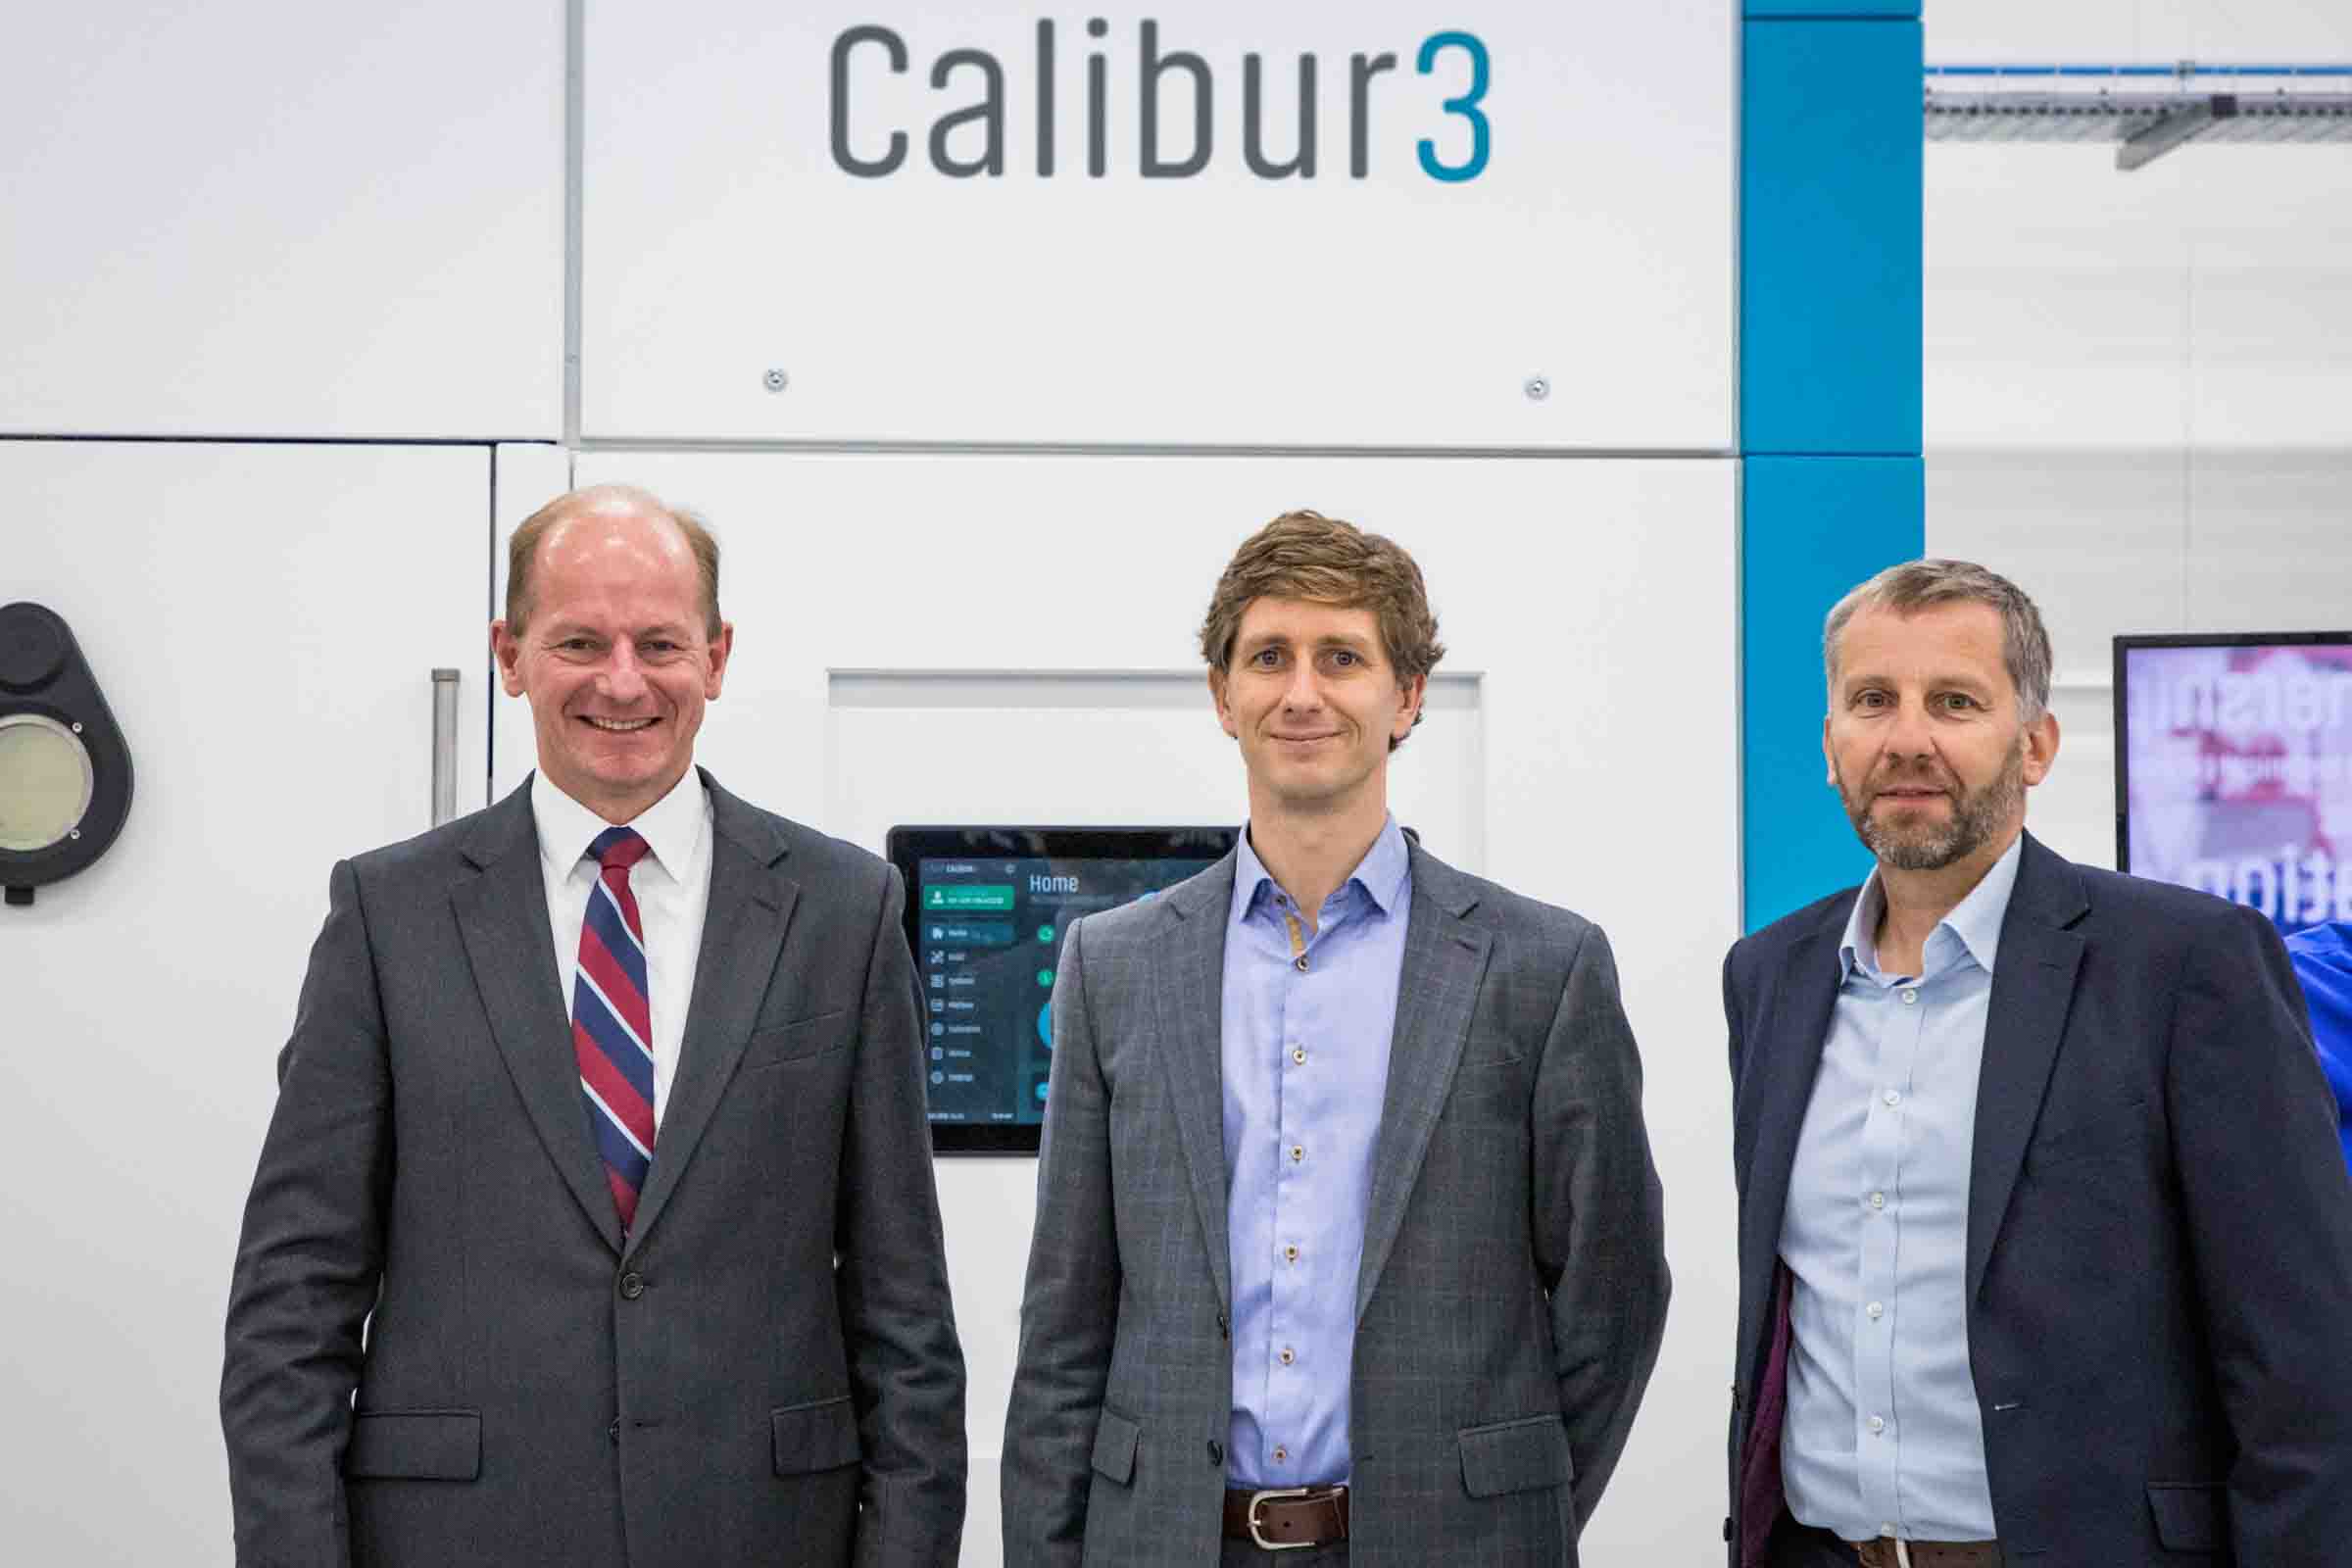 WAYLAND ADDITIVE SELLS CALIBUR3 SYSTEM TO THE ROYAL AIR FORCE